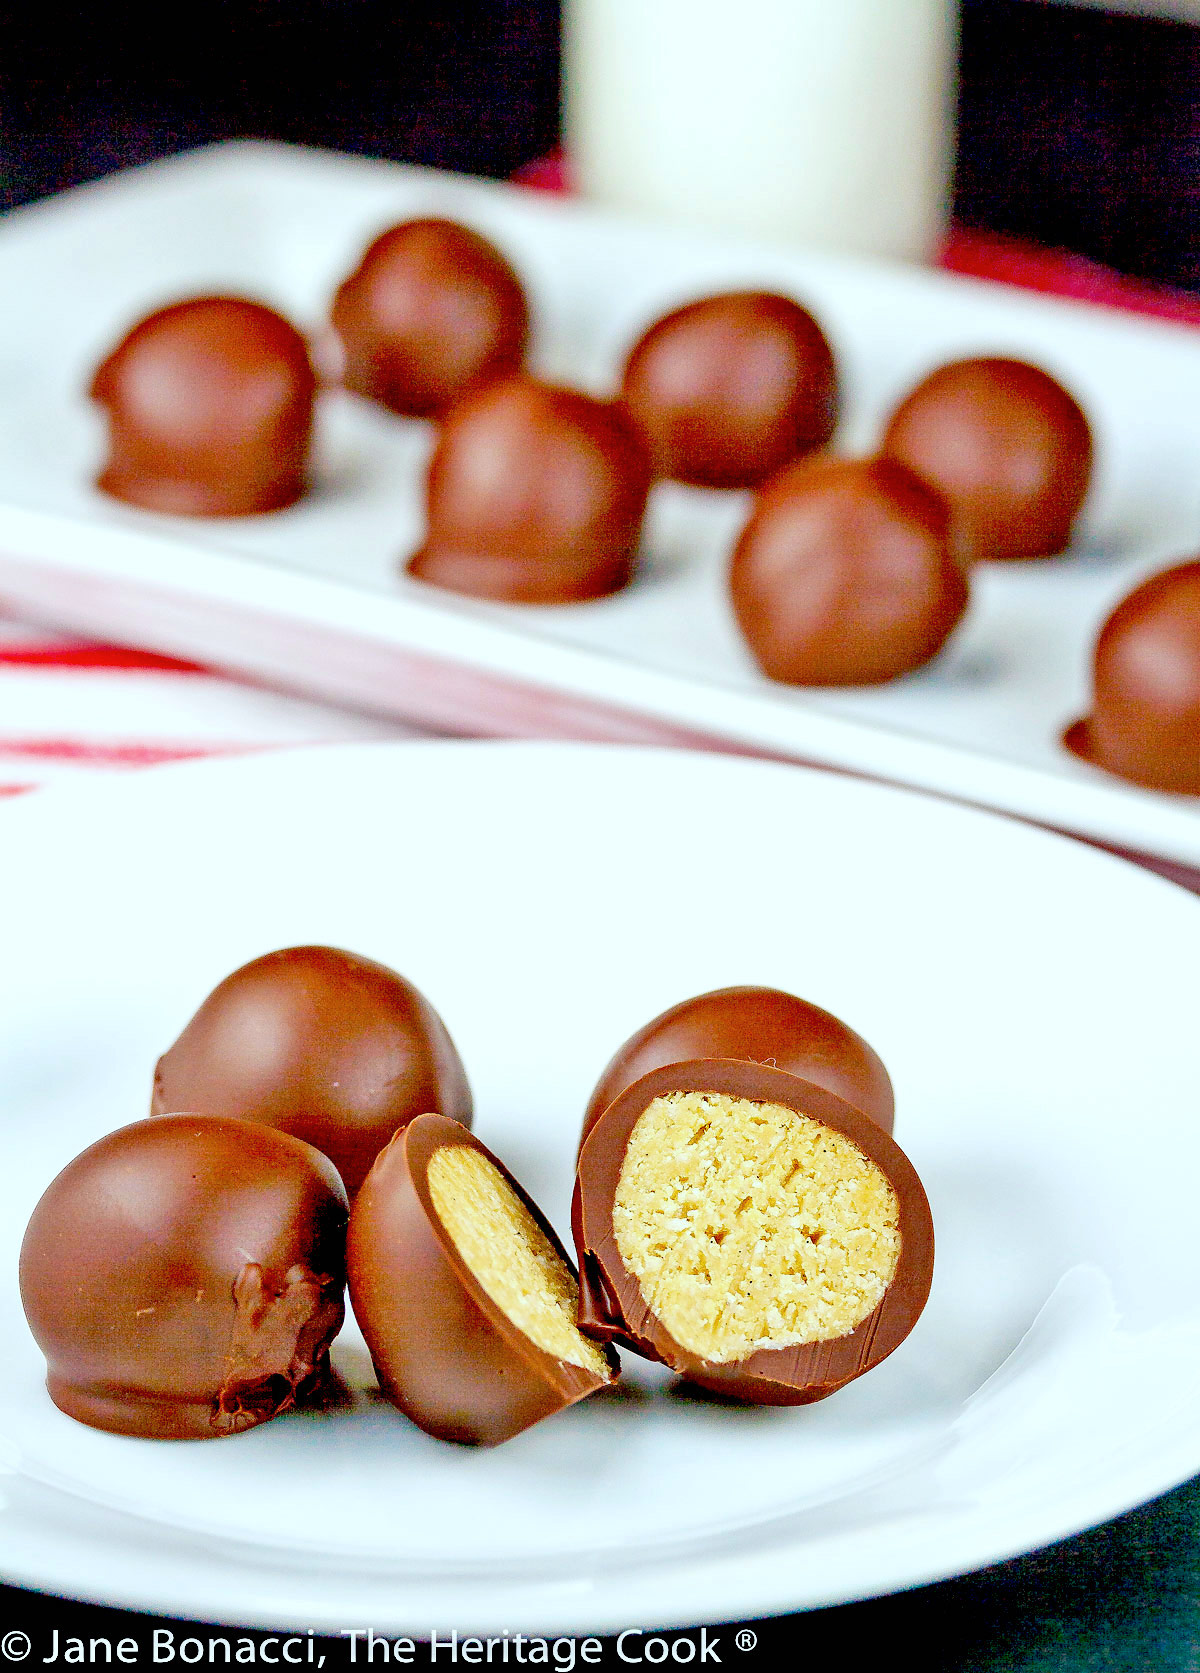 Chocolate Peanut Butter Truffles are balls of sweetened peanut butter filling coated in dark chocolate, some cut open to show the centers, on a white tray or plate on top of red striped towels © 2023 Jane Bonacci, The Heritage Cook. 